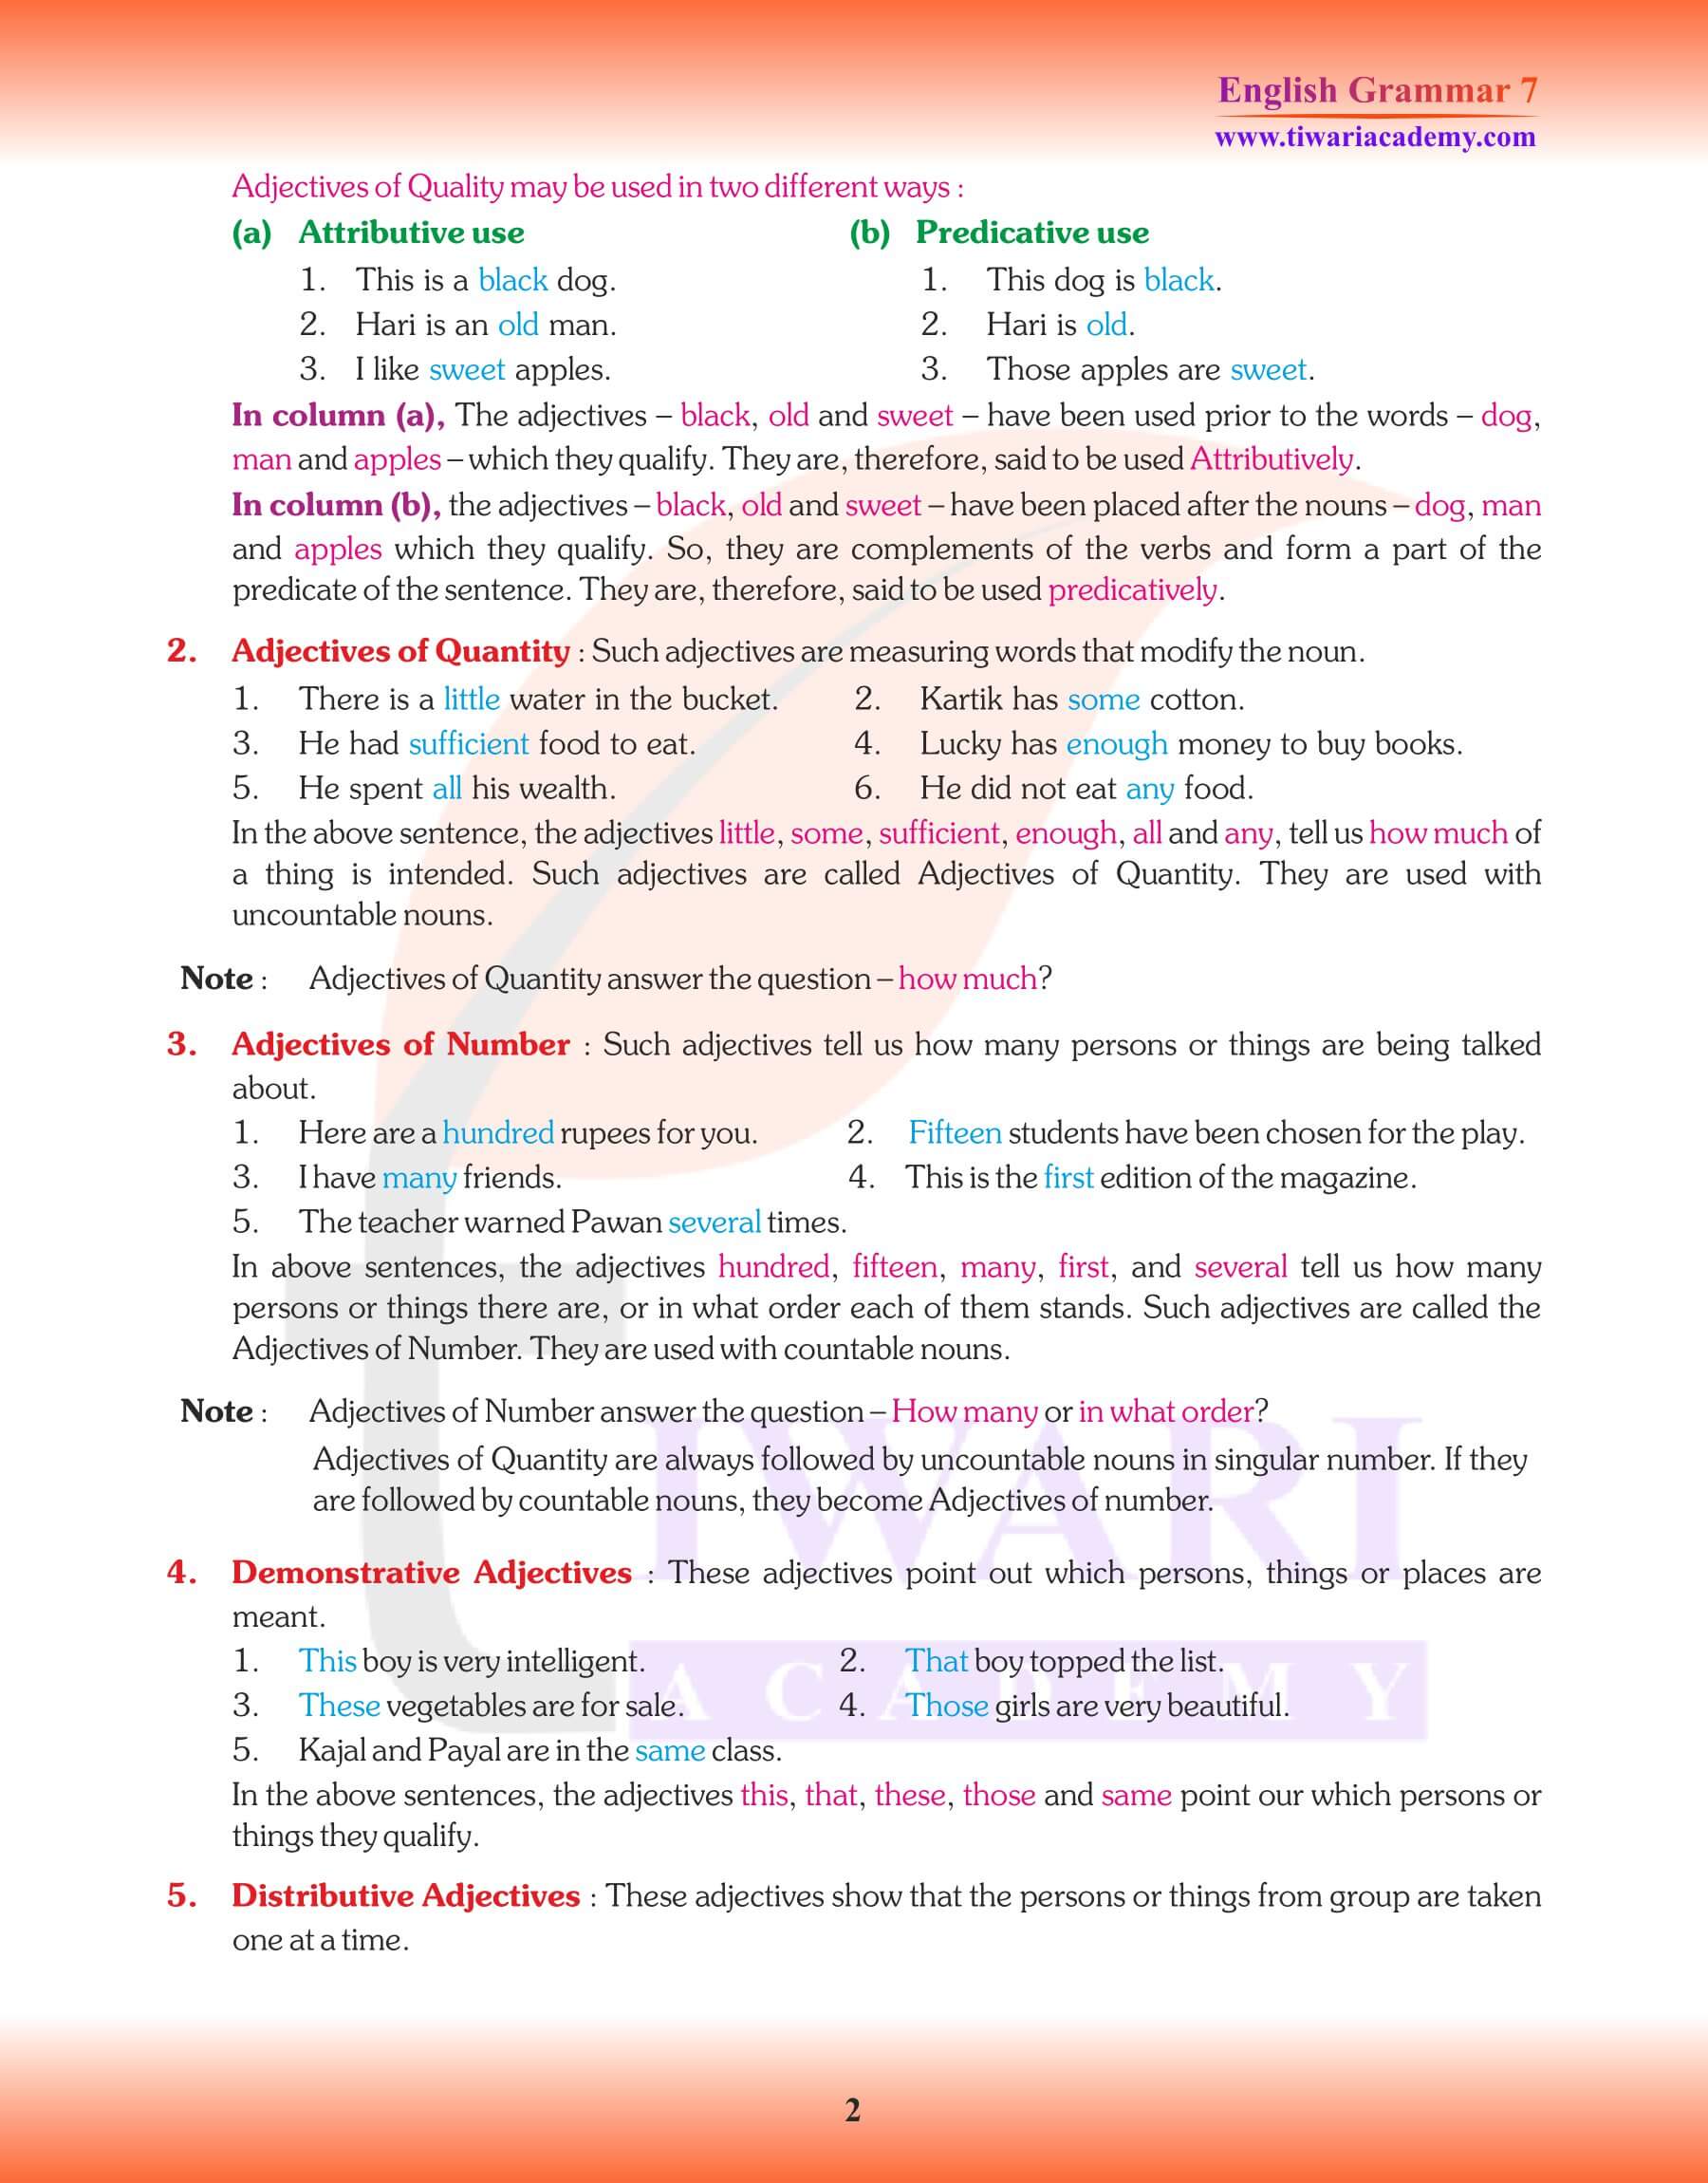 Class 7 English Grammar Chapter 7 Revision Book